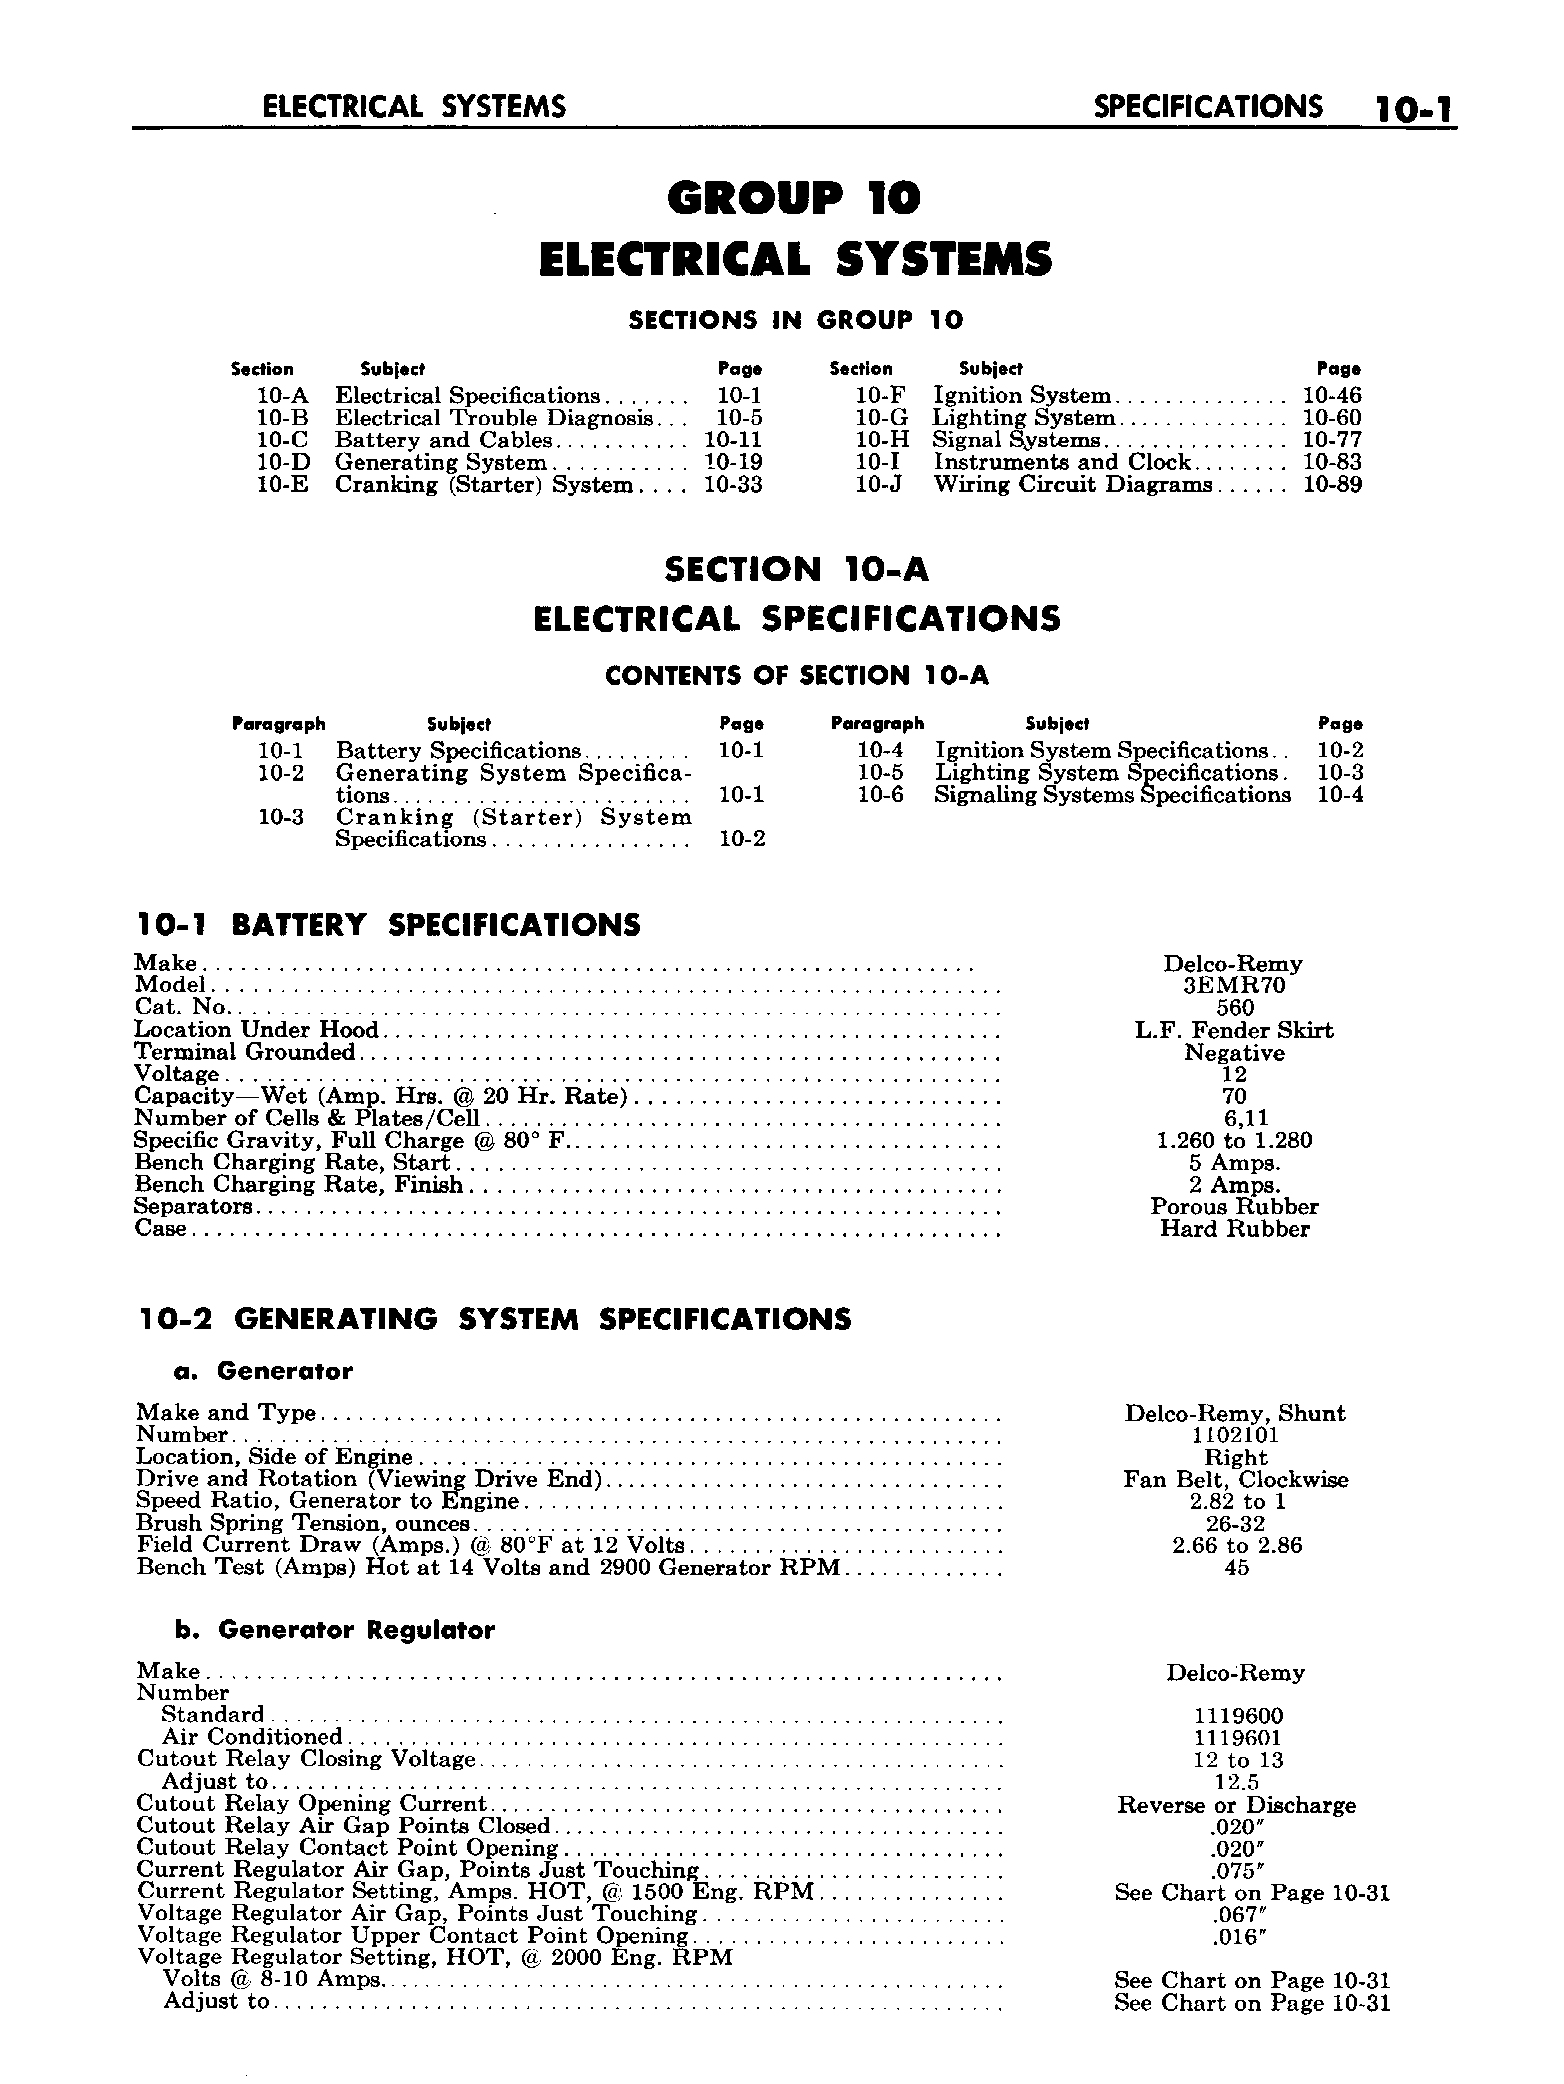 n_11 1958 Buick Shop Manual - Electrical Systems_1.jpg